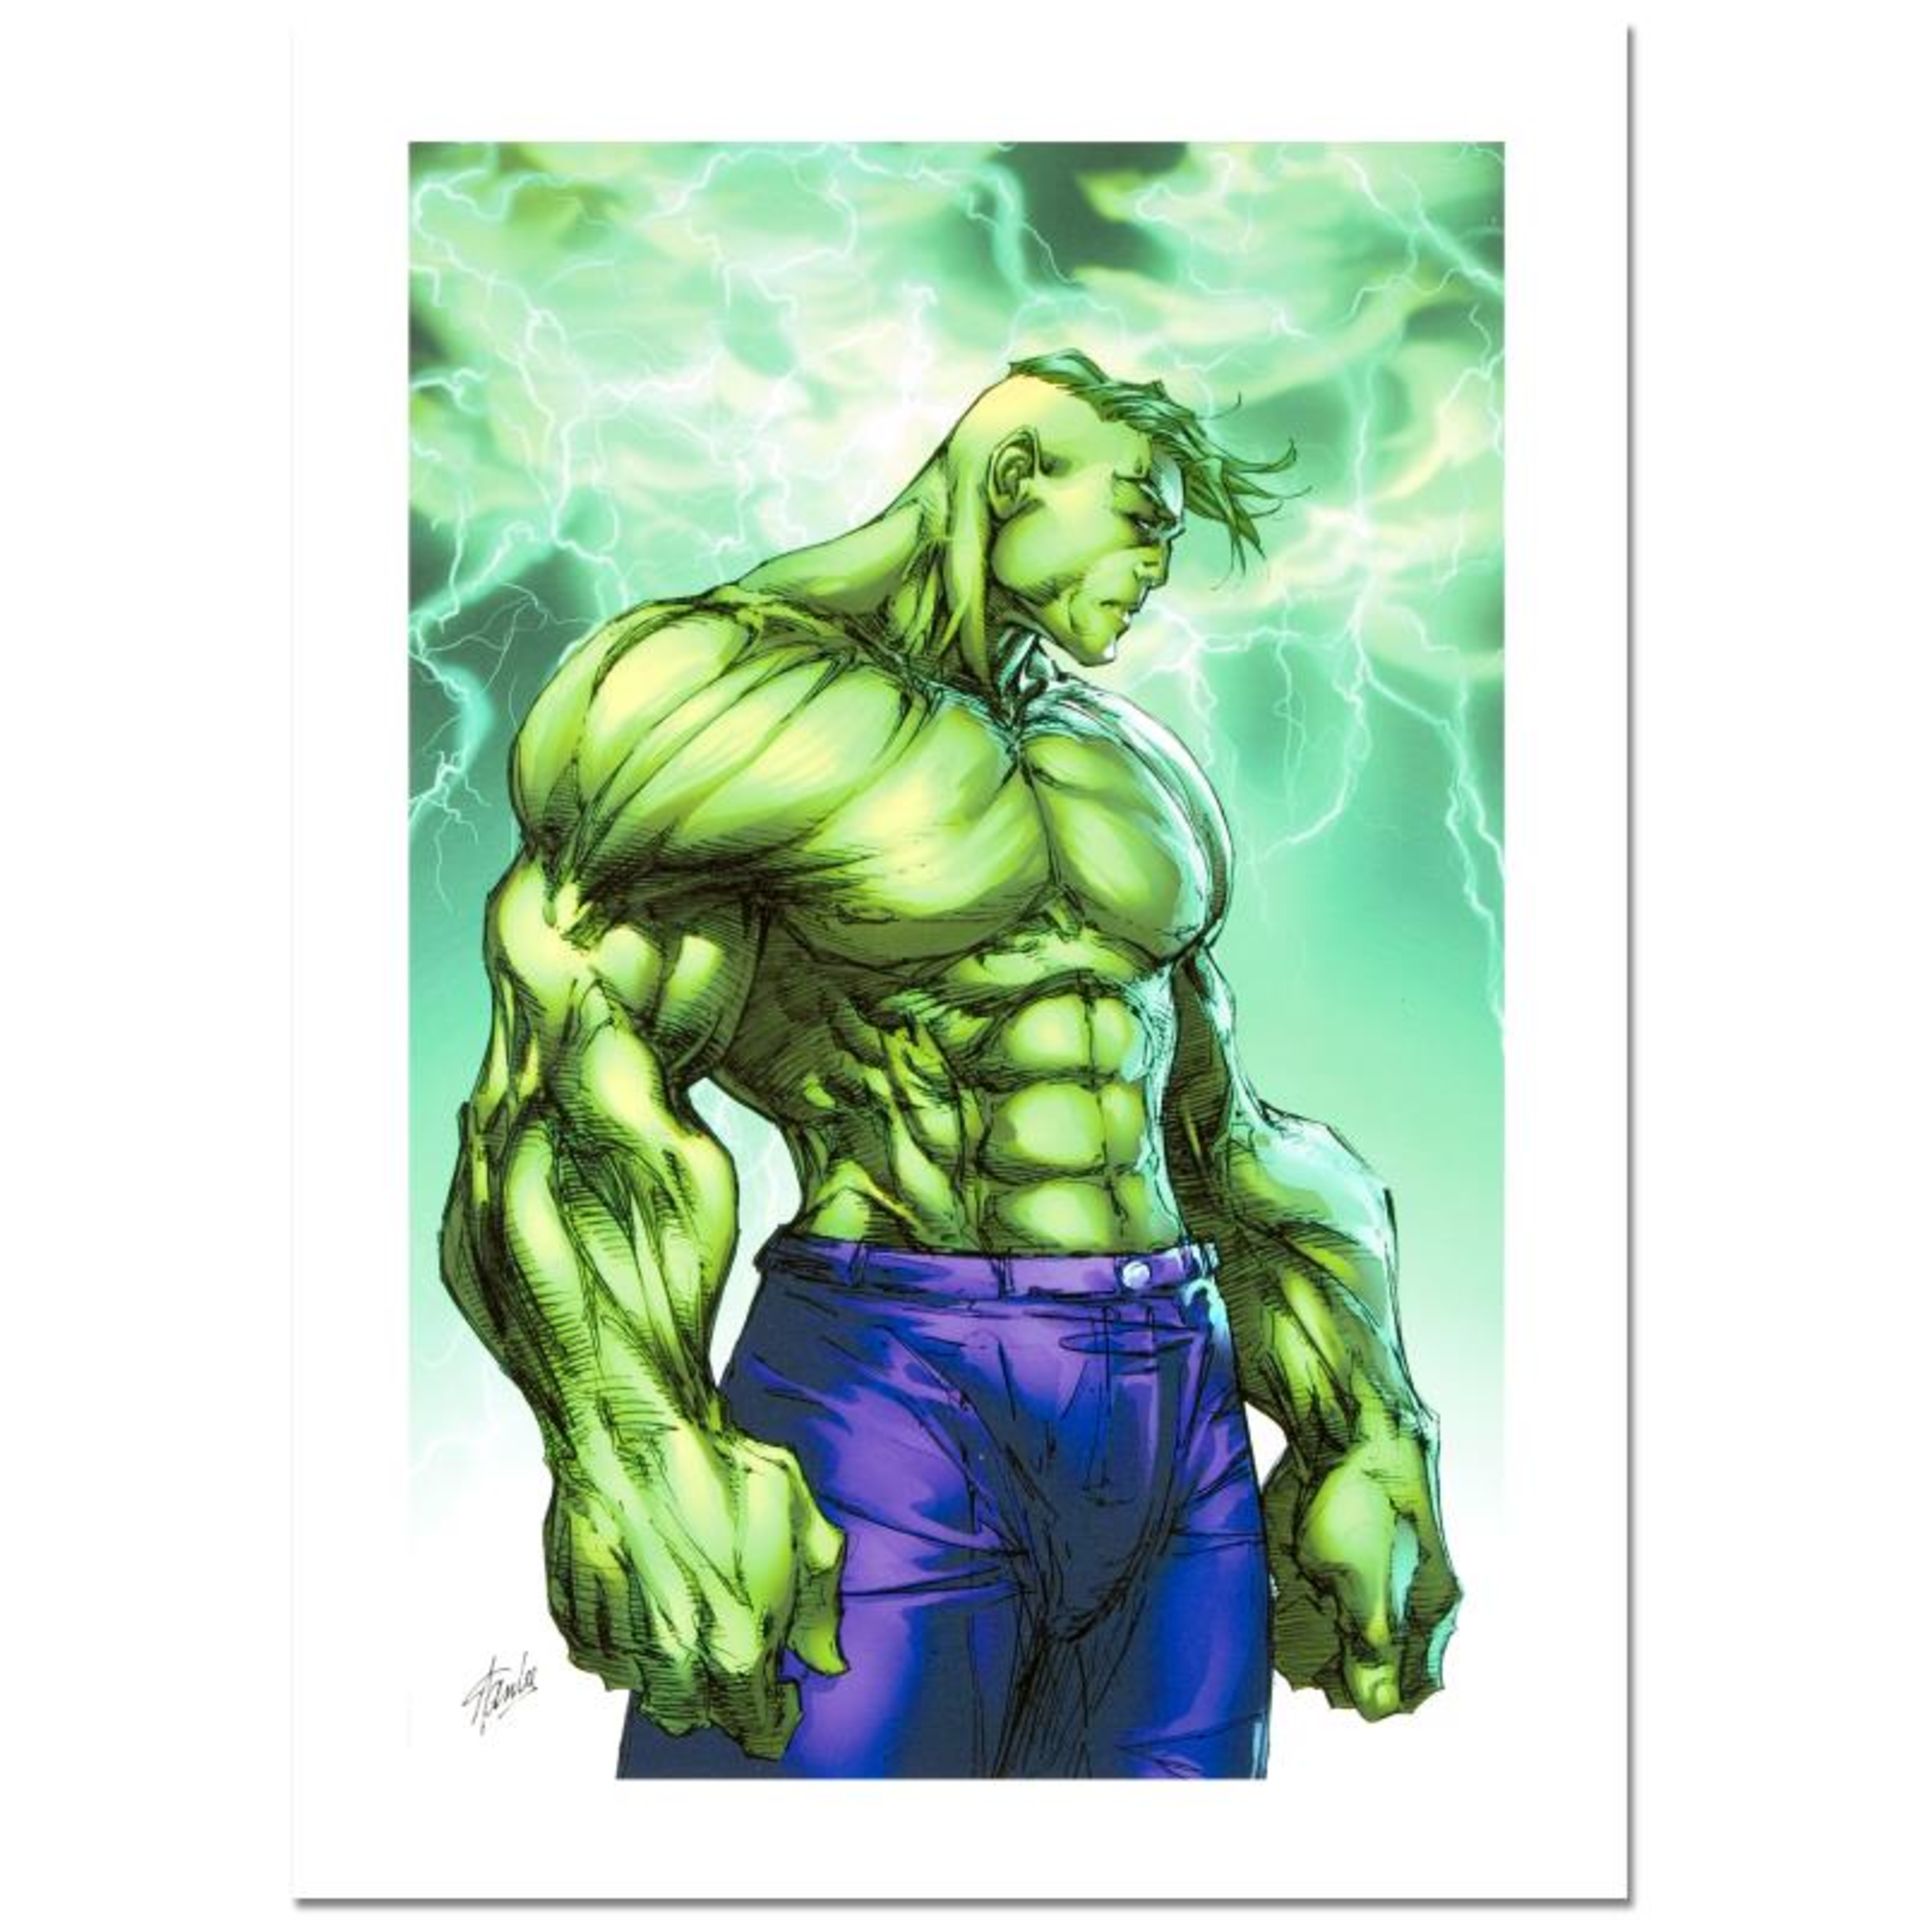 Stan Lee Signed, "Hulk #7" Numbered Marvel Comics Limited Edition Canvas by Mich